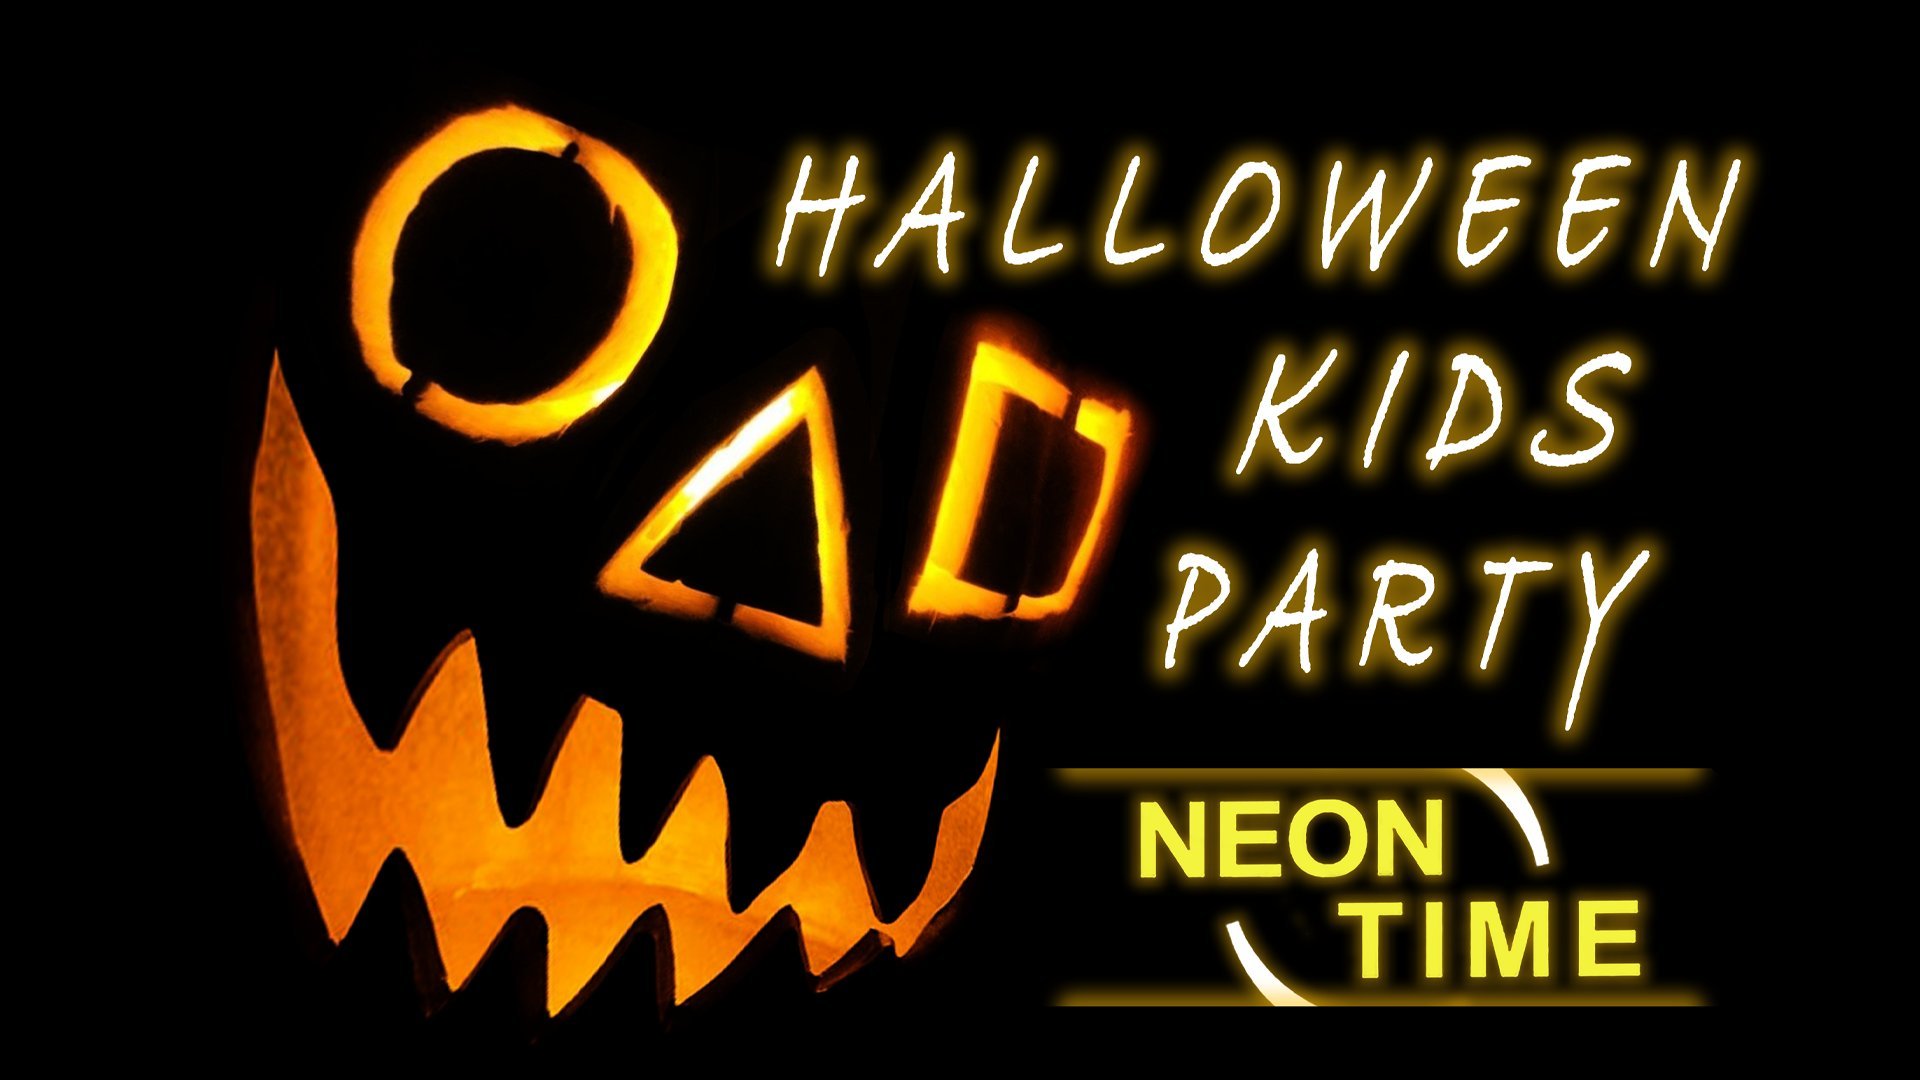 Neon Time Halloween Party